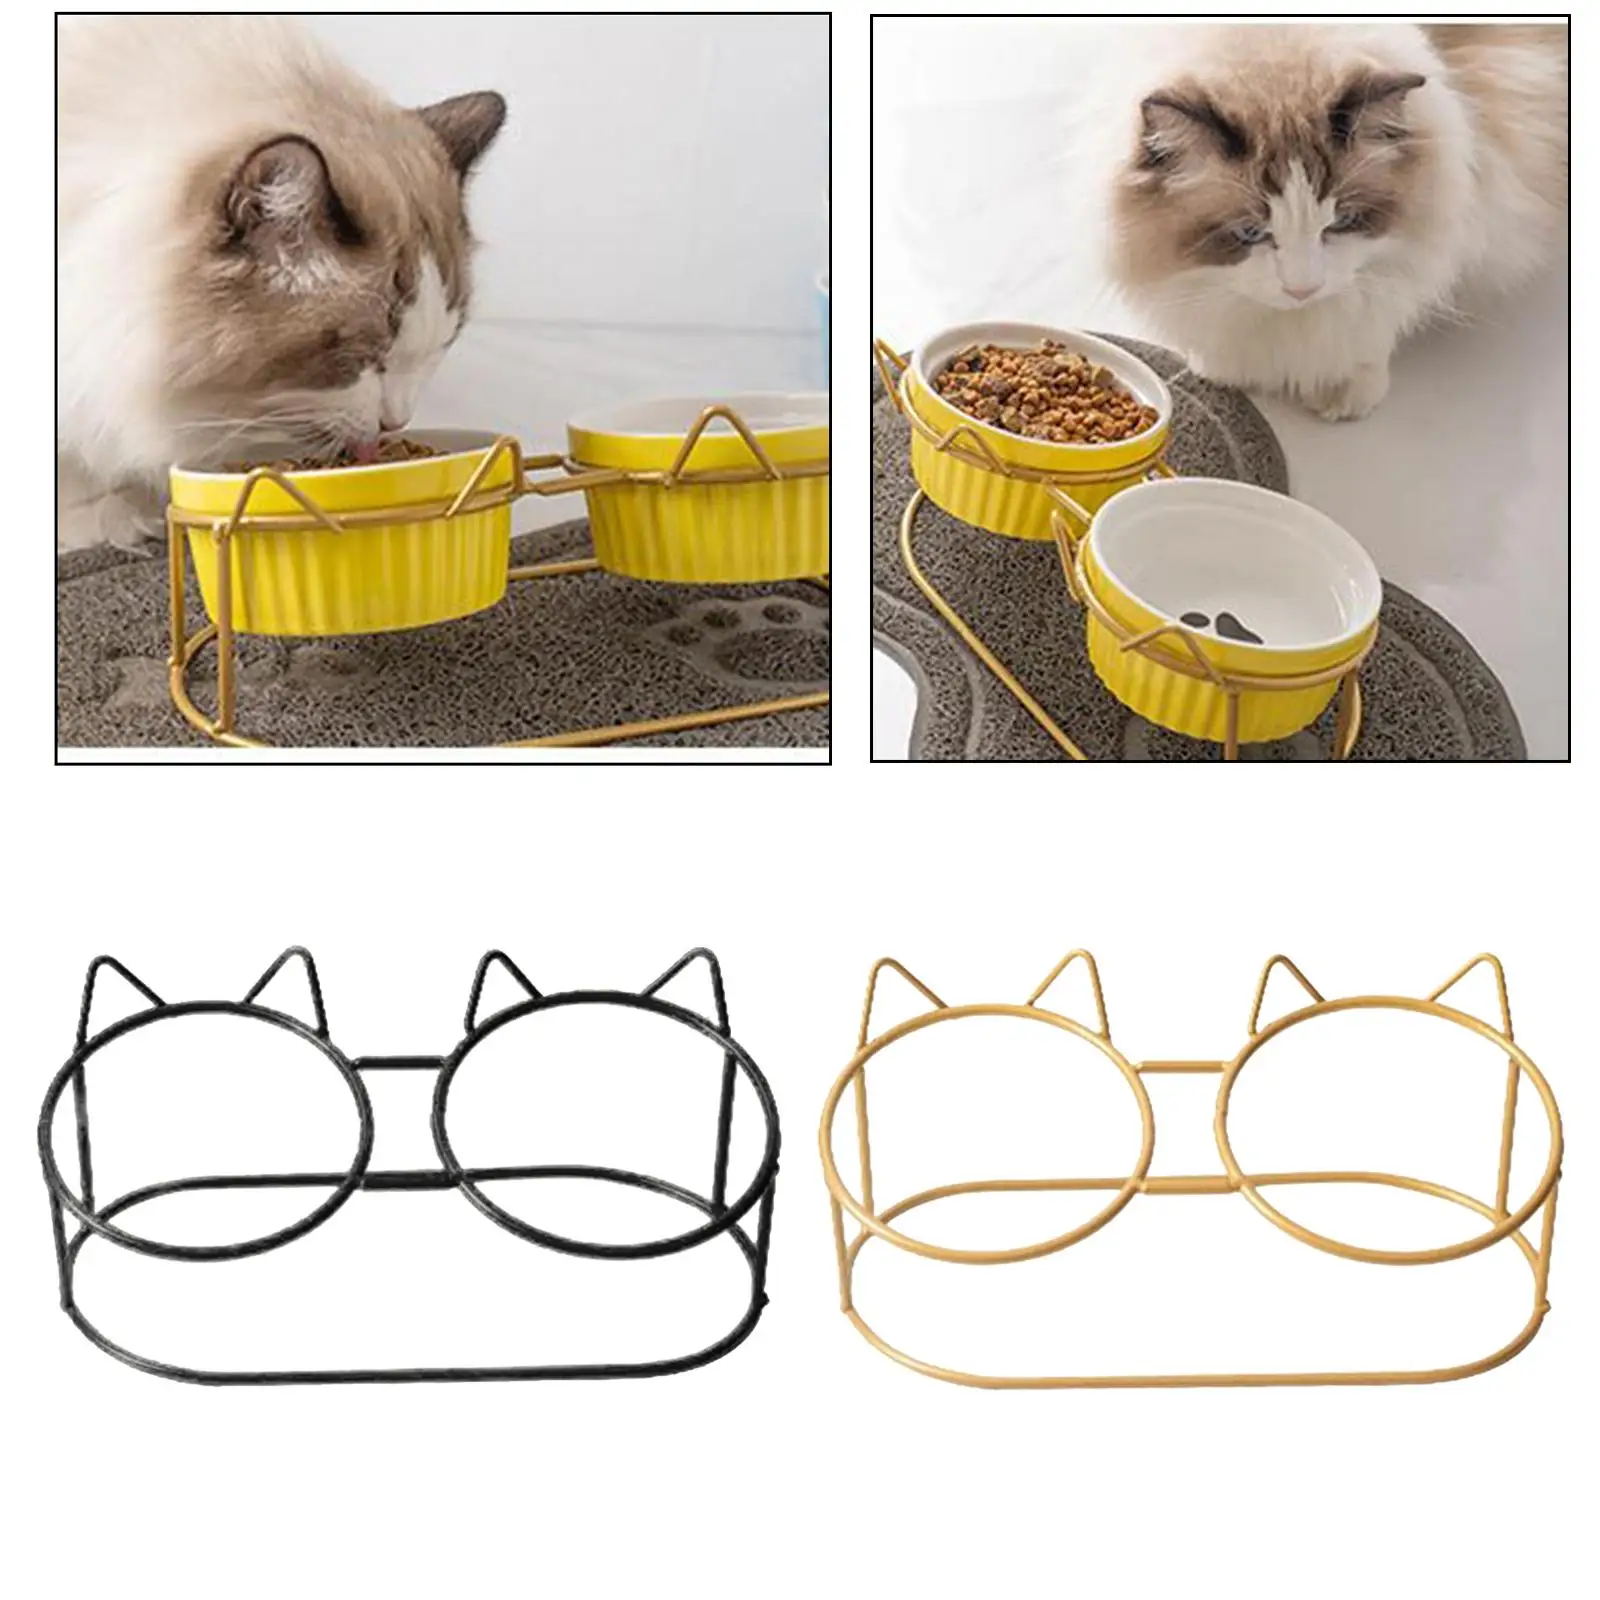 Retro Cat Bowls Raised Stand Neck Guard Stand Double Elevated for Pet Ceramic Bowl Double Dog Cat Food Feeding Bowls